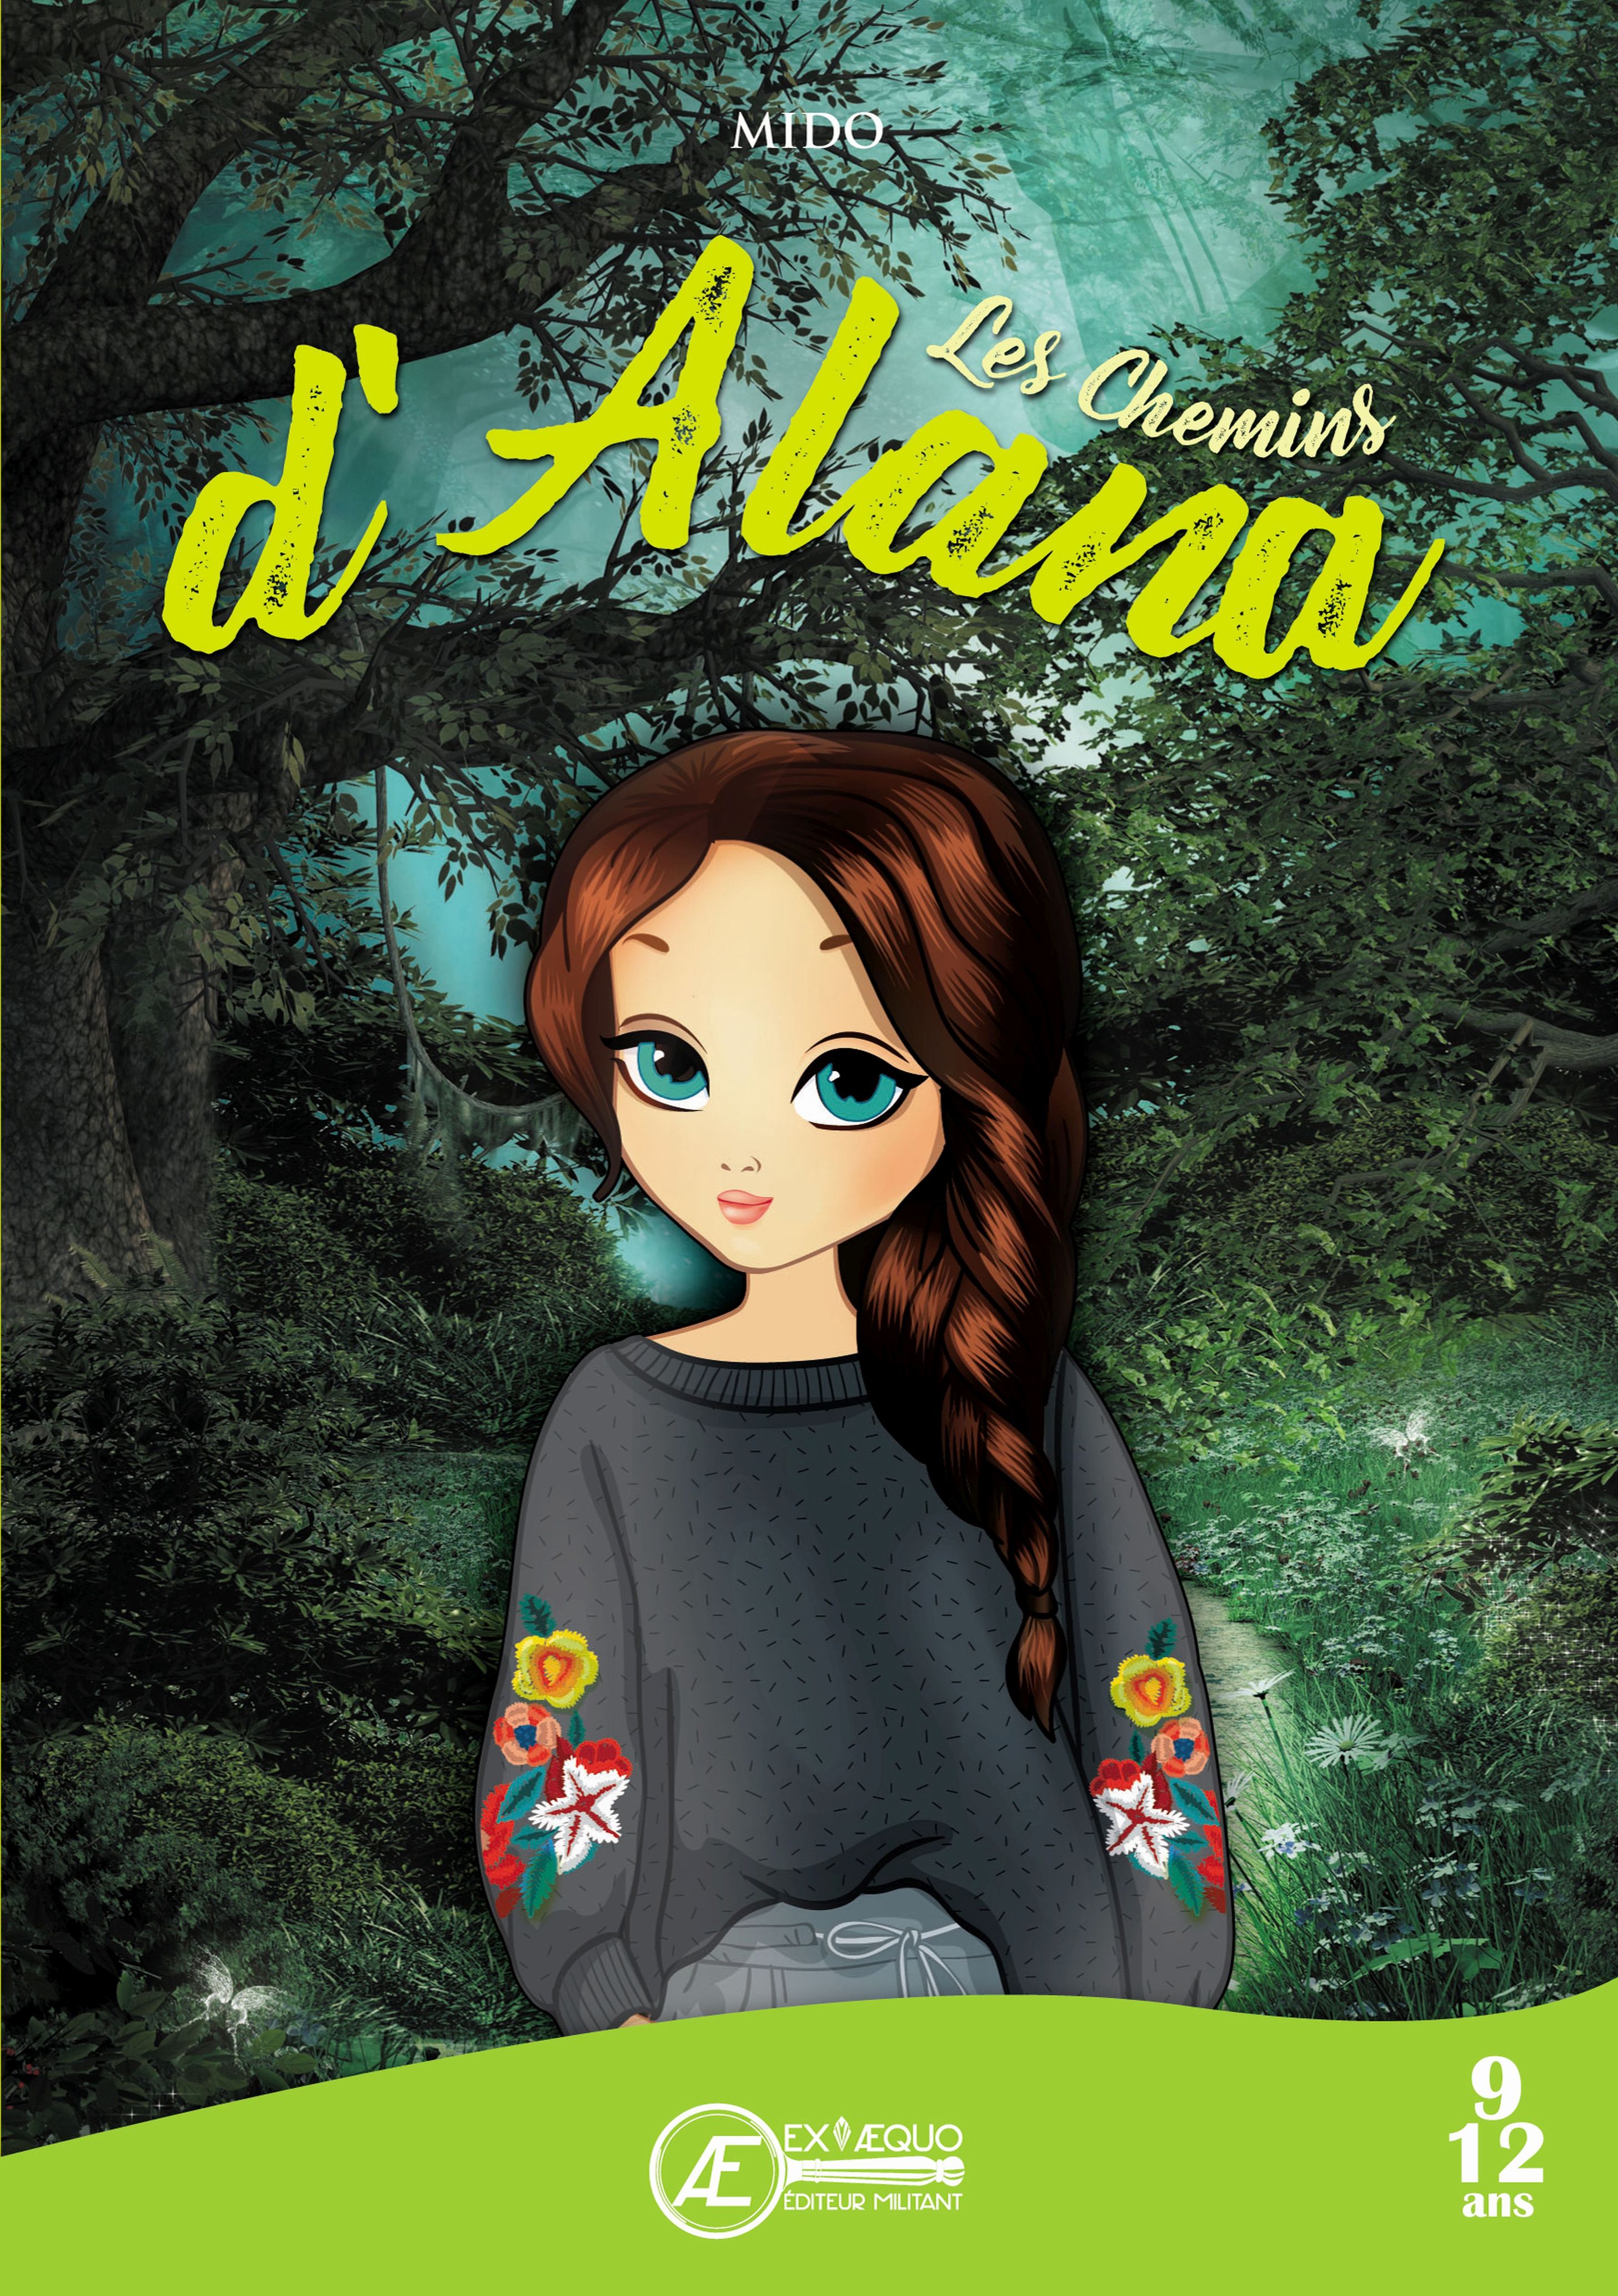 You are currently viewing Les chemins d’Alana, de Mido